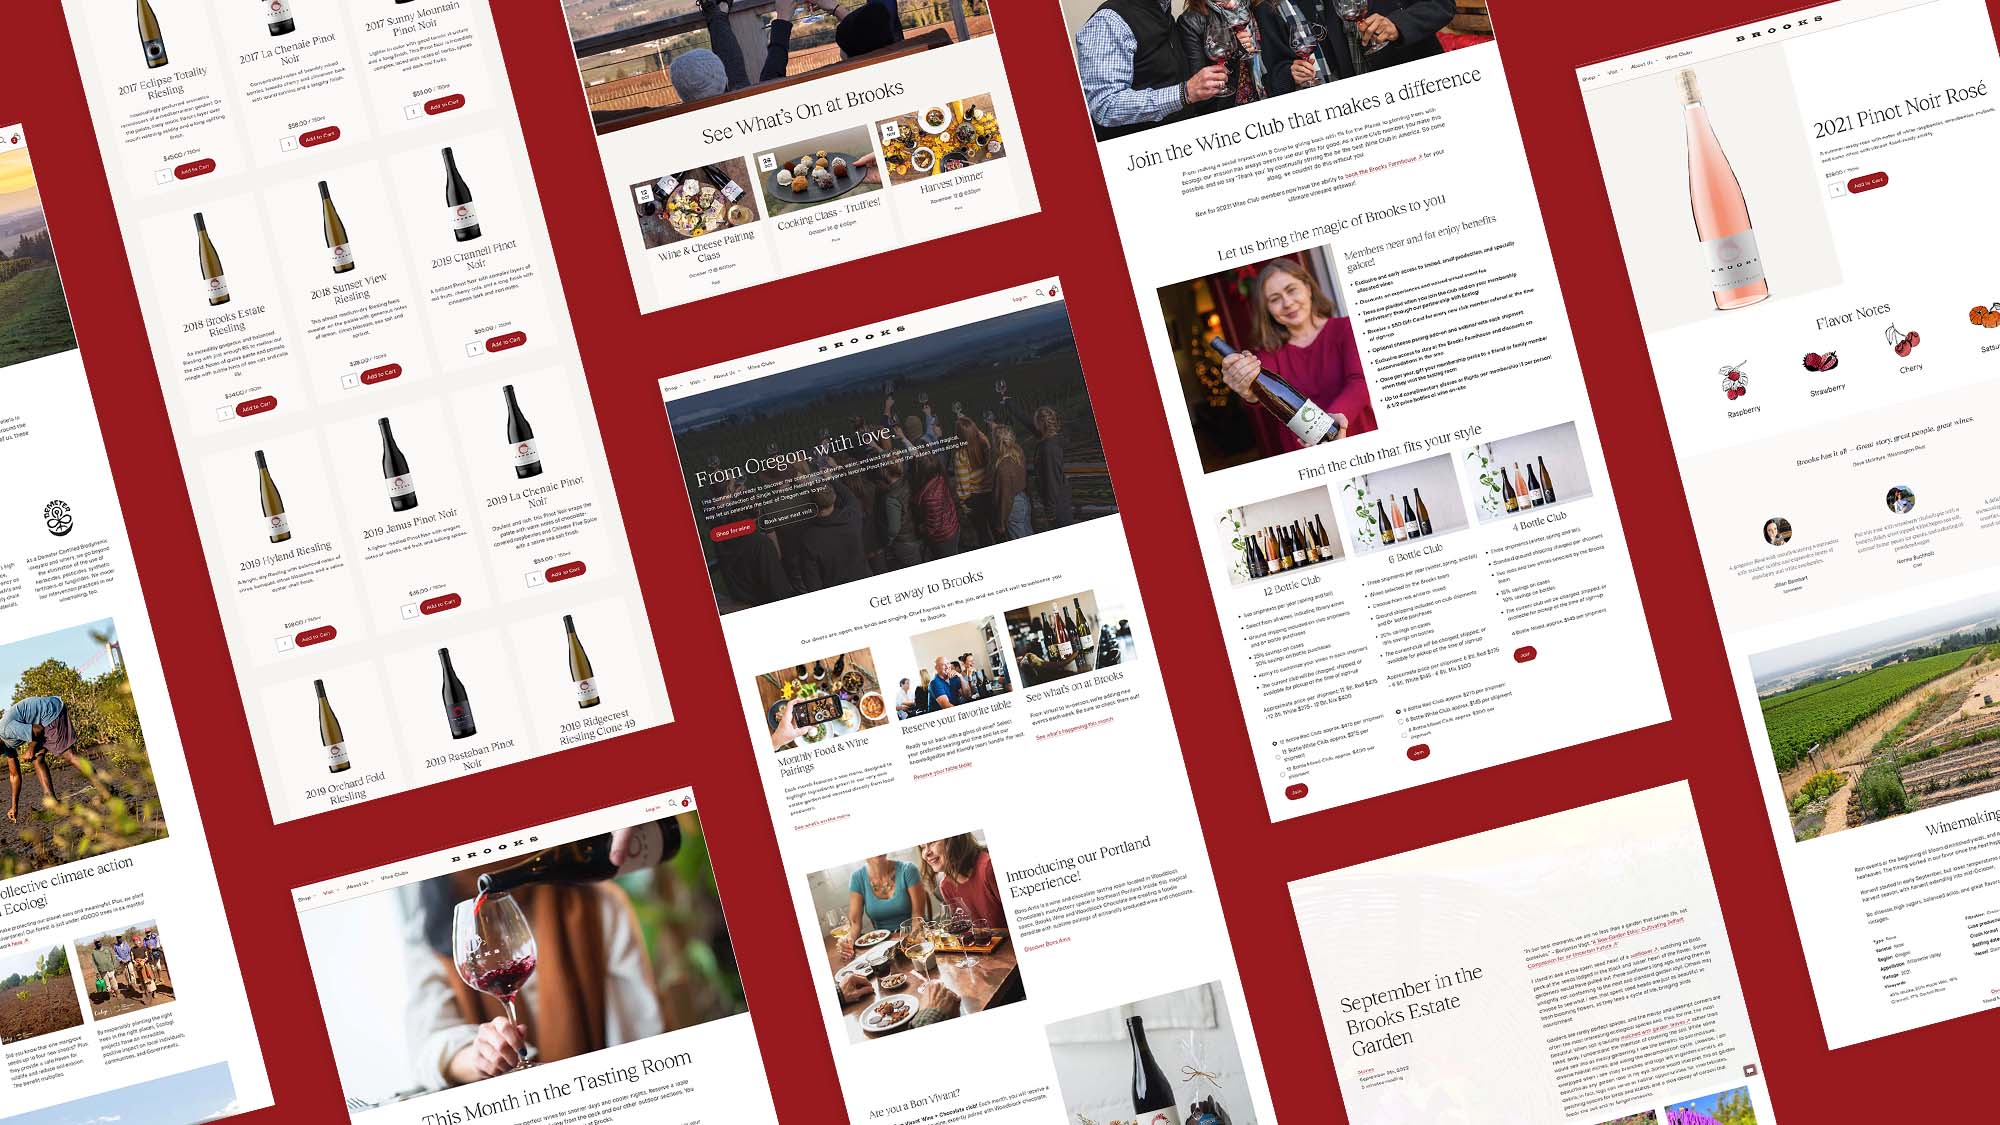 Styled mockups of the new Brooks Wine website as created by 5forests in 2022.